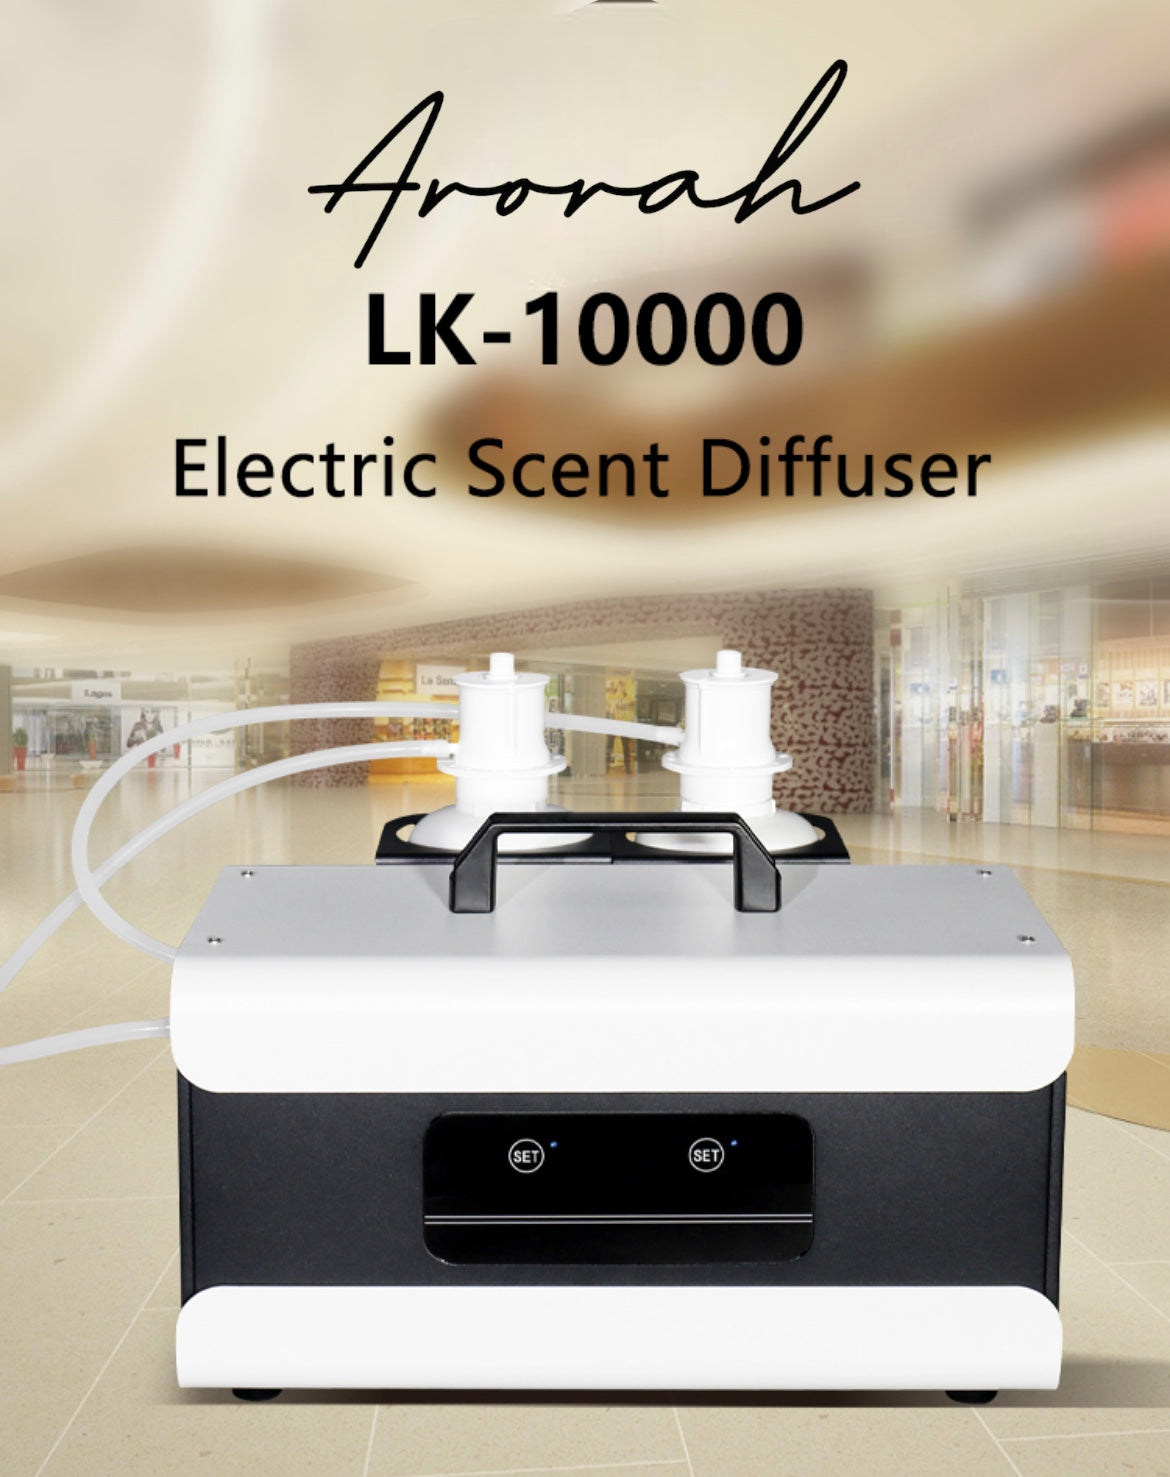 ARORAH LK-10000 Automatic Portable Scent Nebulizer For Super Large Area Waterless Essential Oil Diffuser Air Freshener